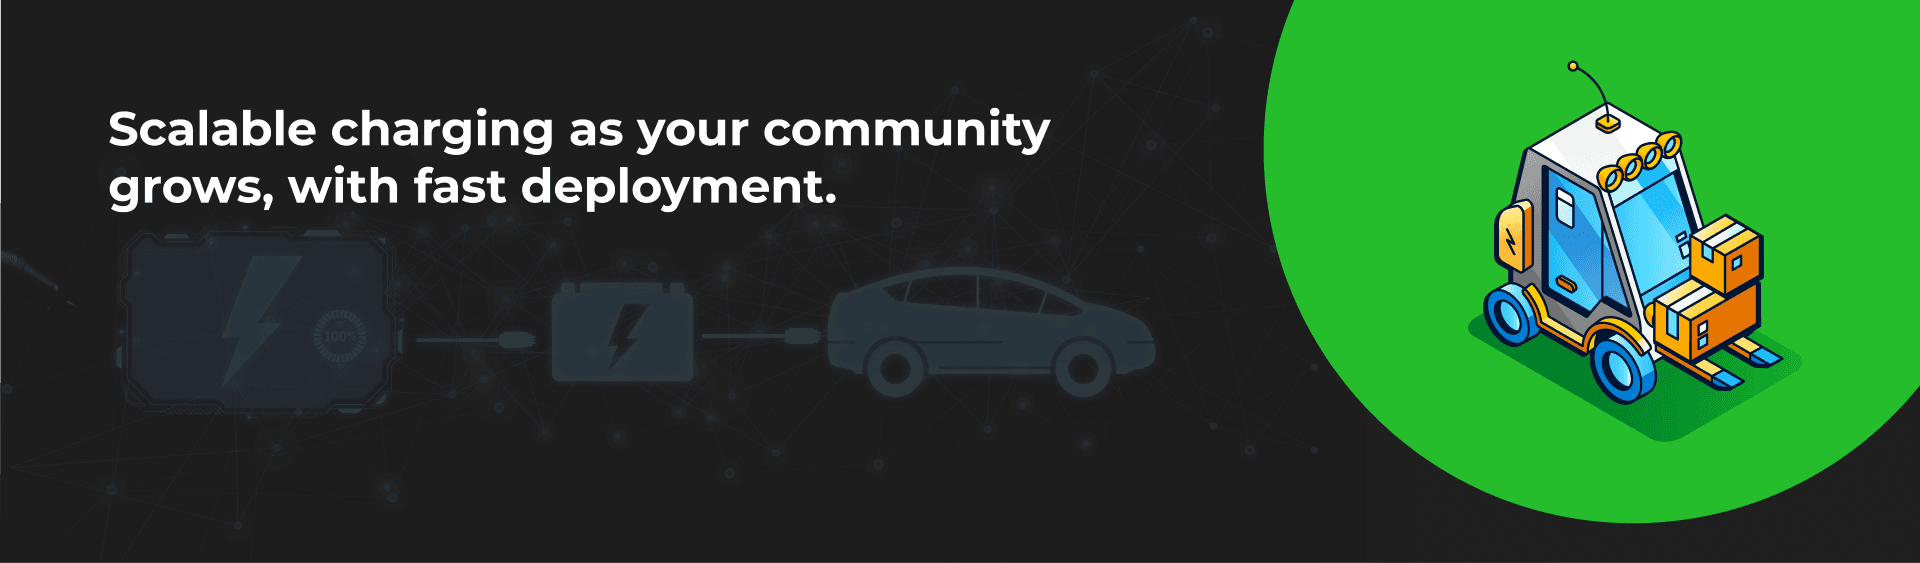 Scalable charging as your community grows, with fast deployment.